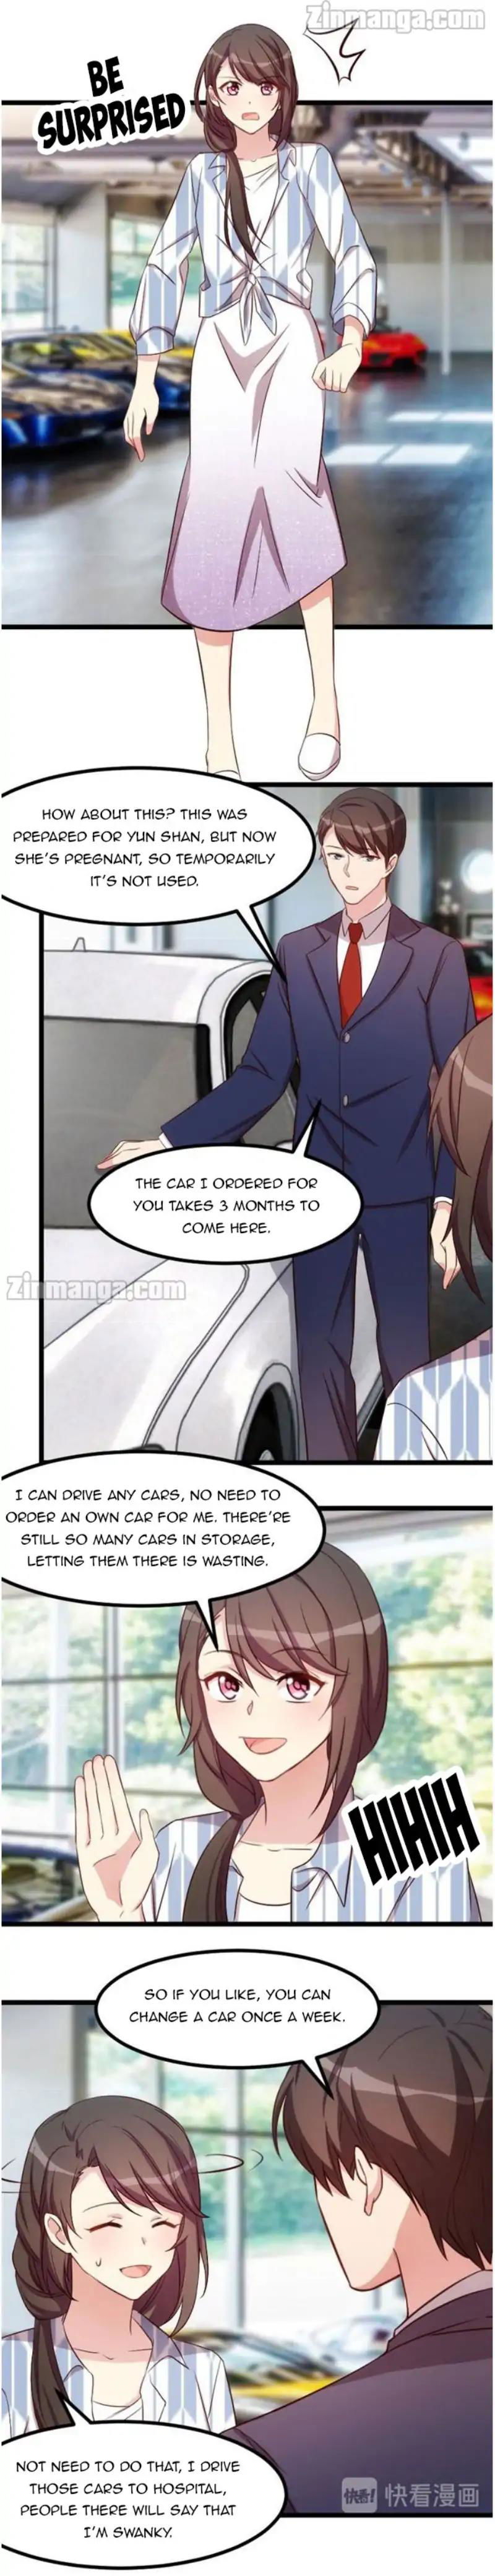 CEO's Sudden Proposal Chapter 199 page 1